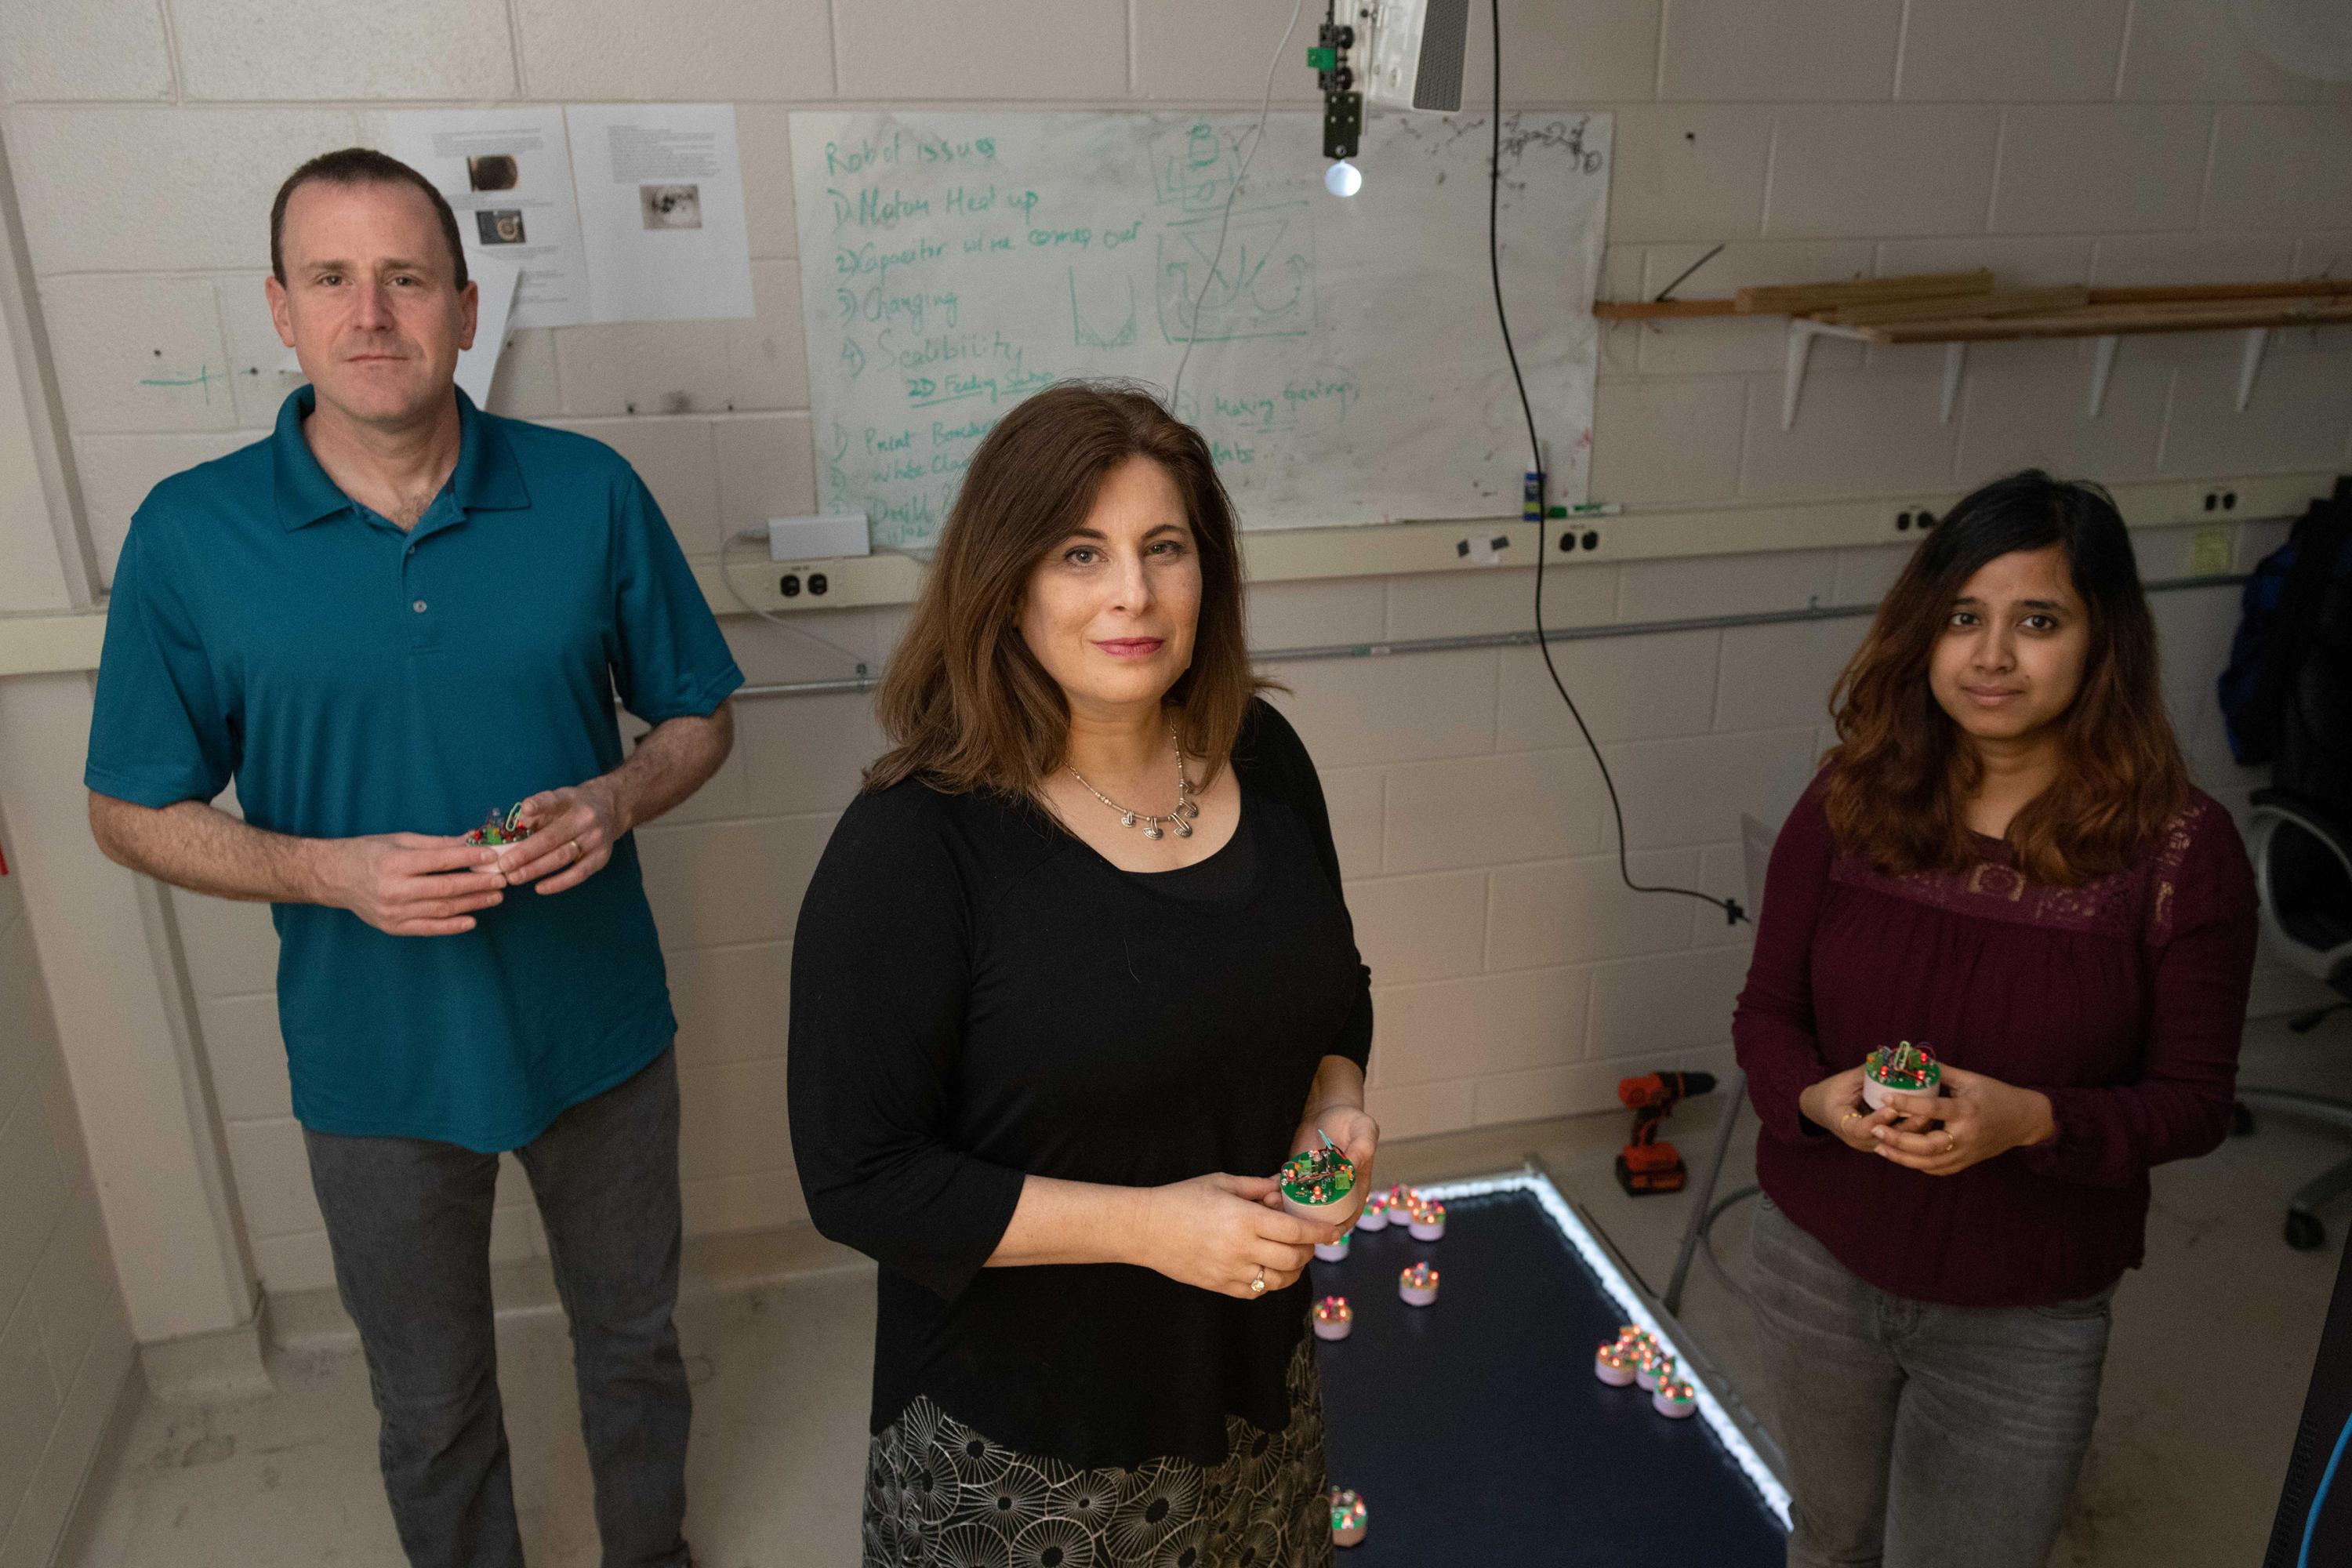 Researchers at the Georgia Institute of Technology have been awarded $6.25 million to use collective emergent behavior to achieve task-oriented objectives. Shown are Dan Goldman, professor in the School of Physics; Dana Randall, co-director of the Institute for Data Engineering and Science, and Ph.D. student Bahnisikha Dutta. (Photo: Allison Carter, Georgia Tech)